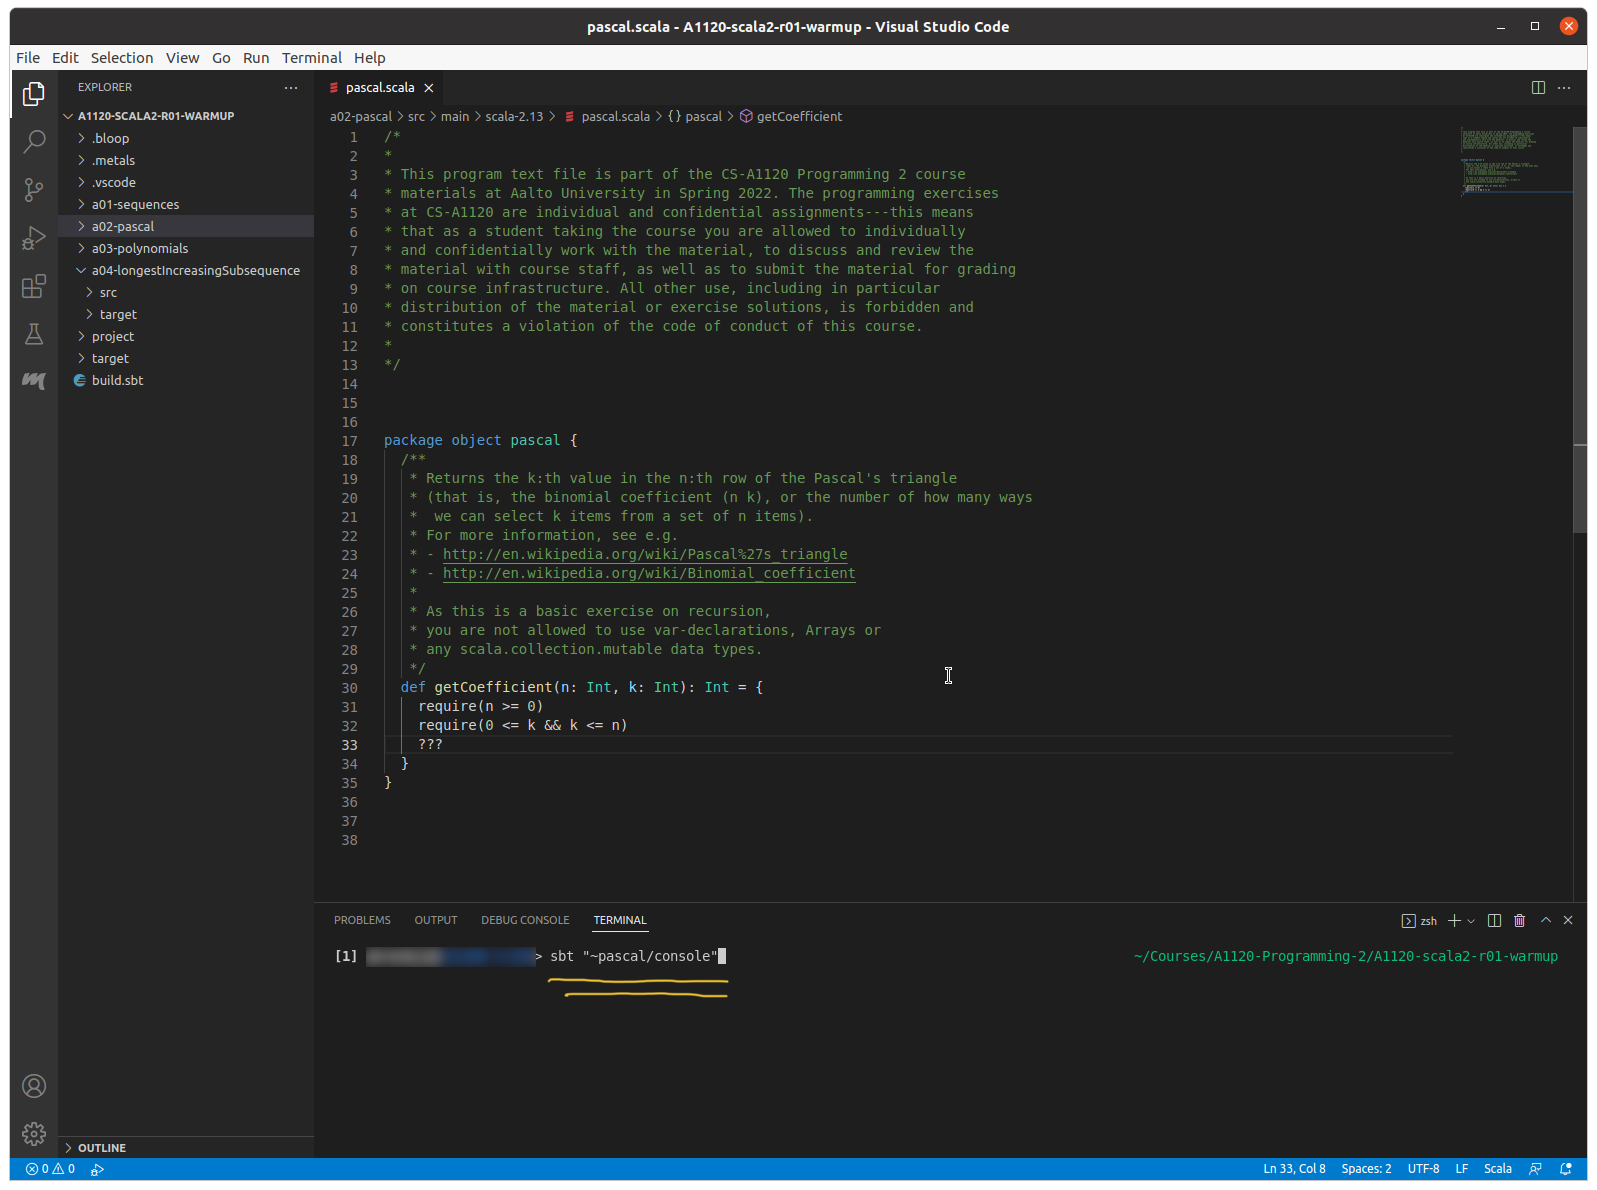 _images/vscode-console-1-annot.png